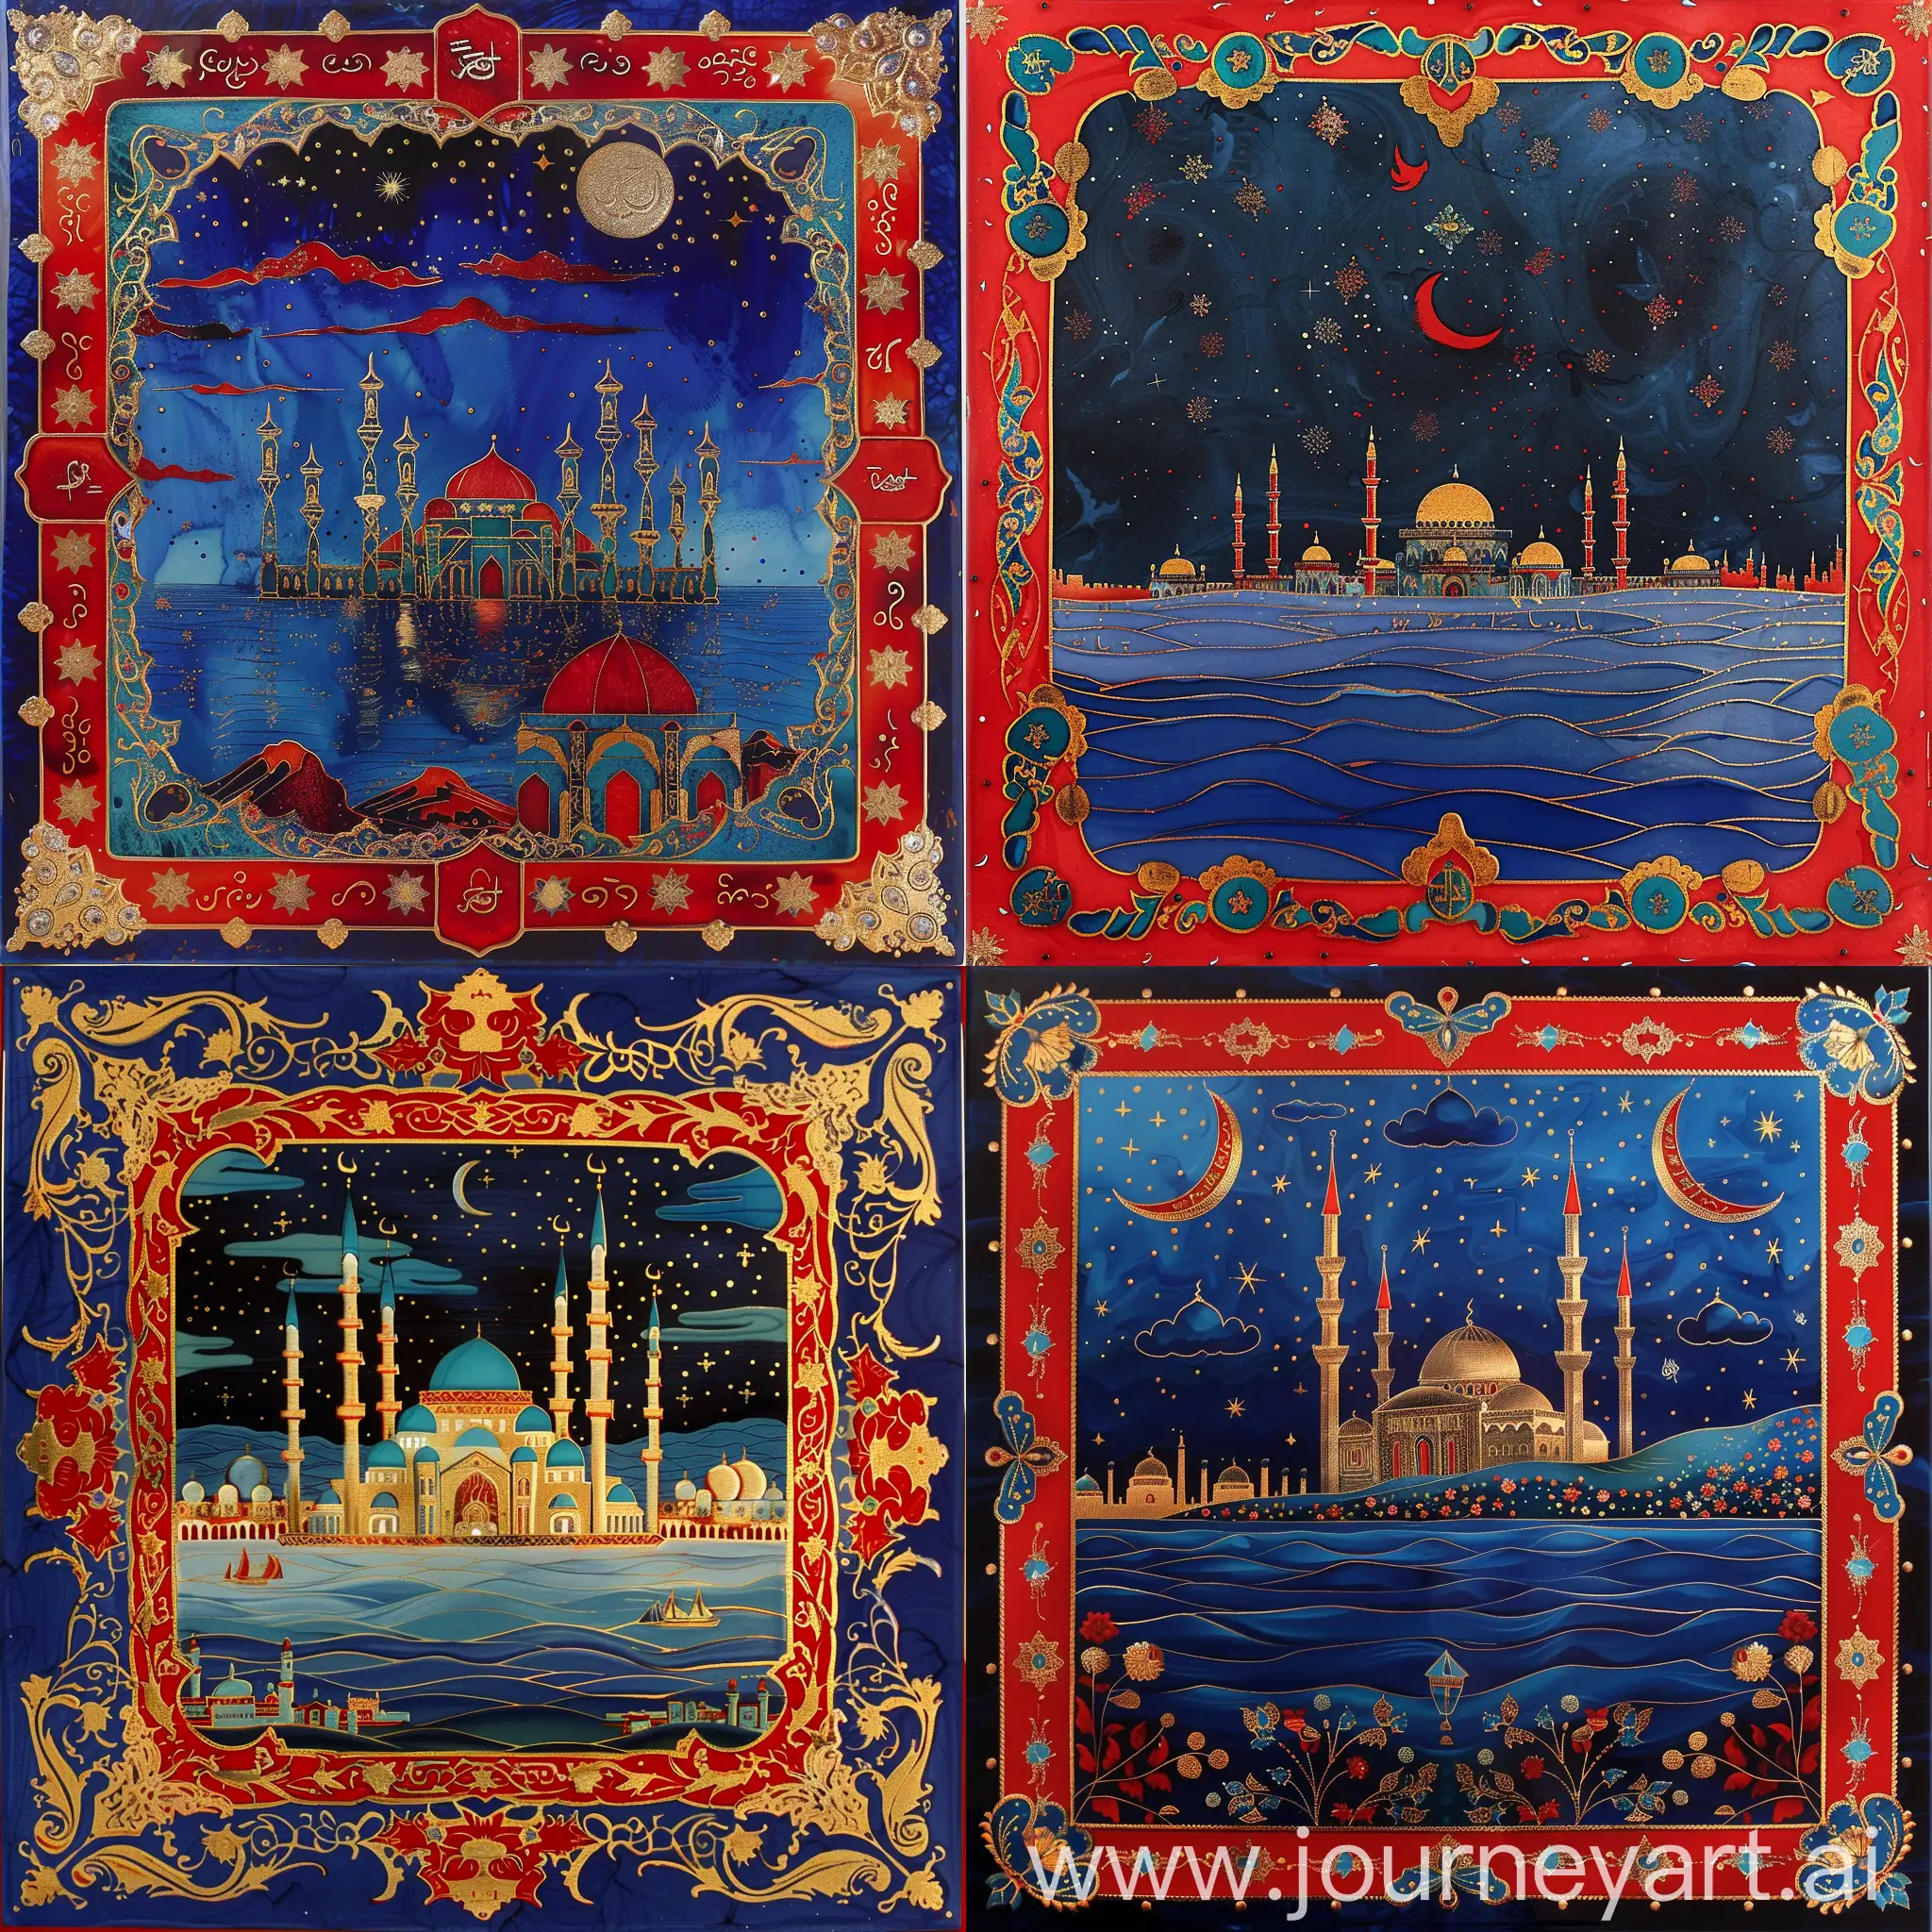 a lusterware having red blue islamic style iznik and arabesque decorated ornaments on border, depicting painting of a fantasy grand mosque beyond sea under night sky, golden outlines, red blue black red turquoise green white colored